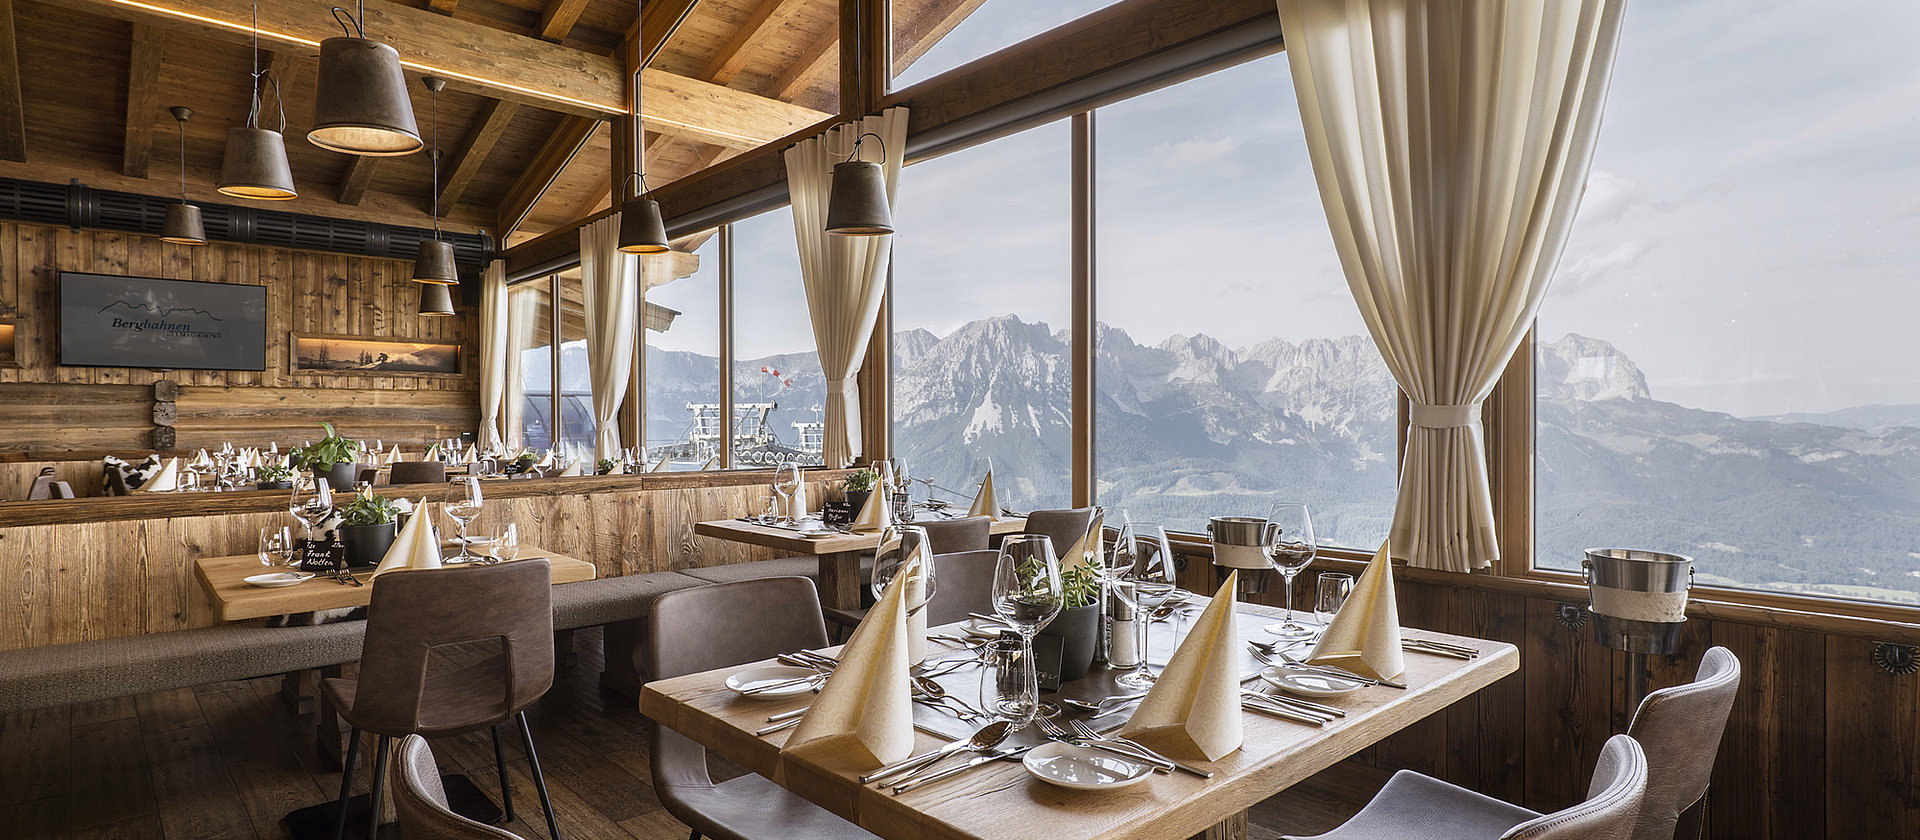 Event location in Tyrol ©Alex Gretter